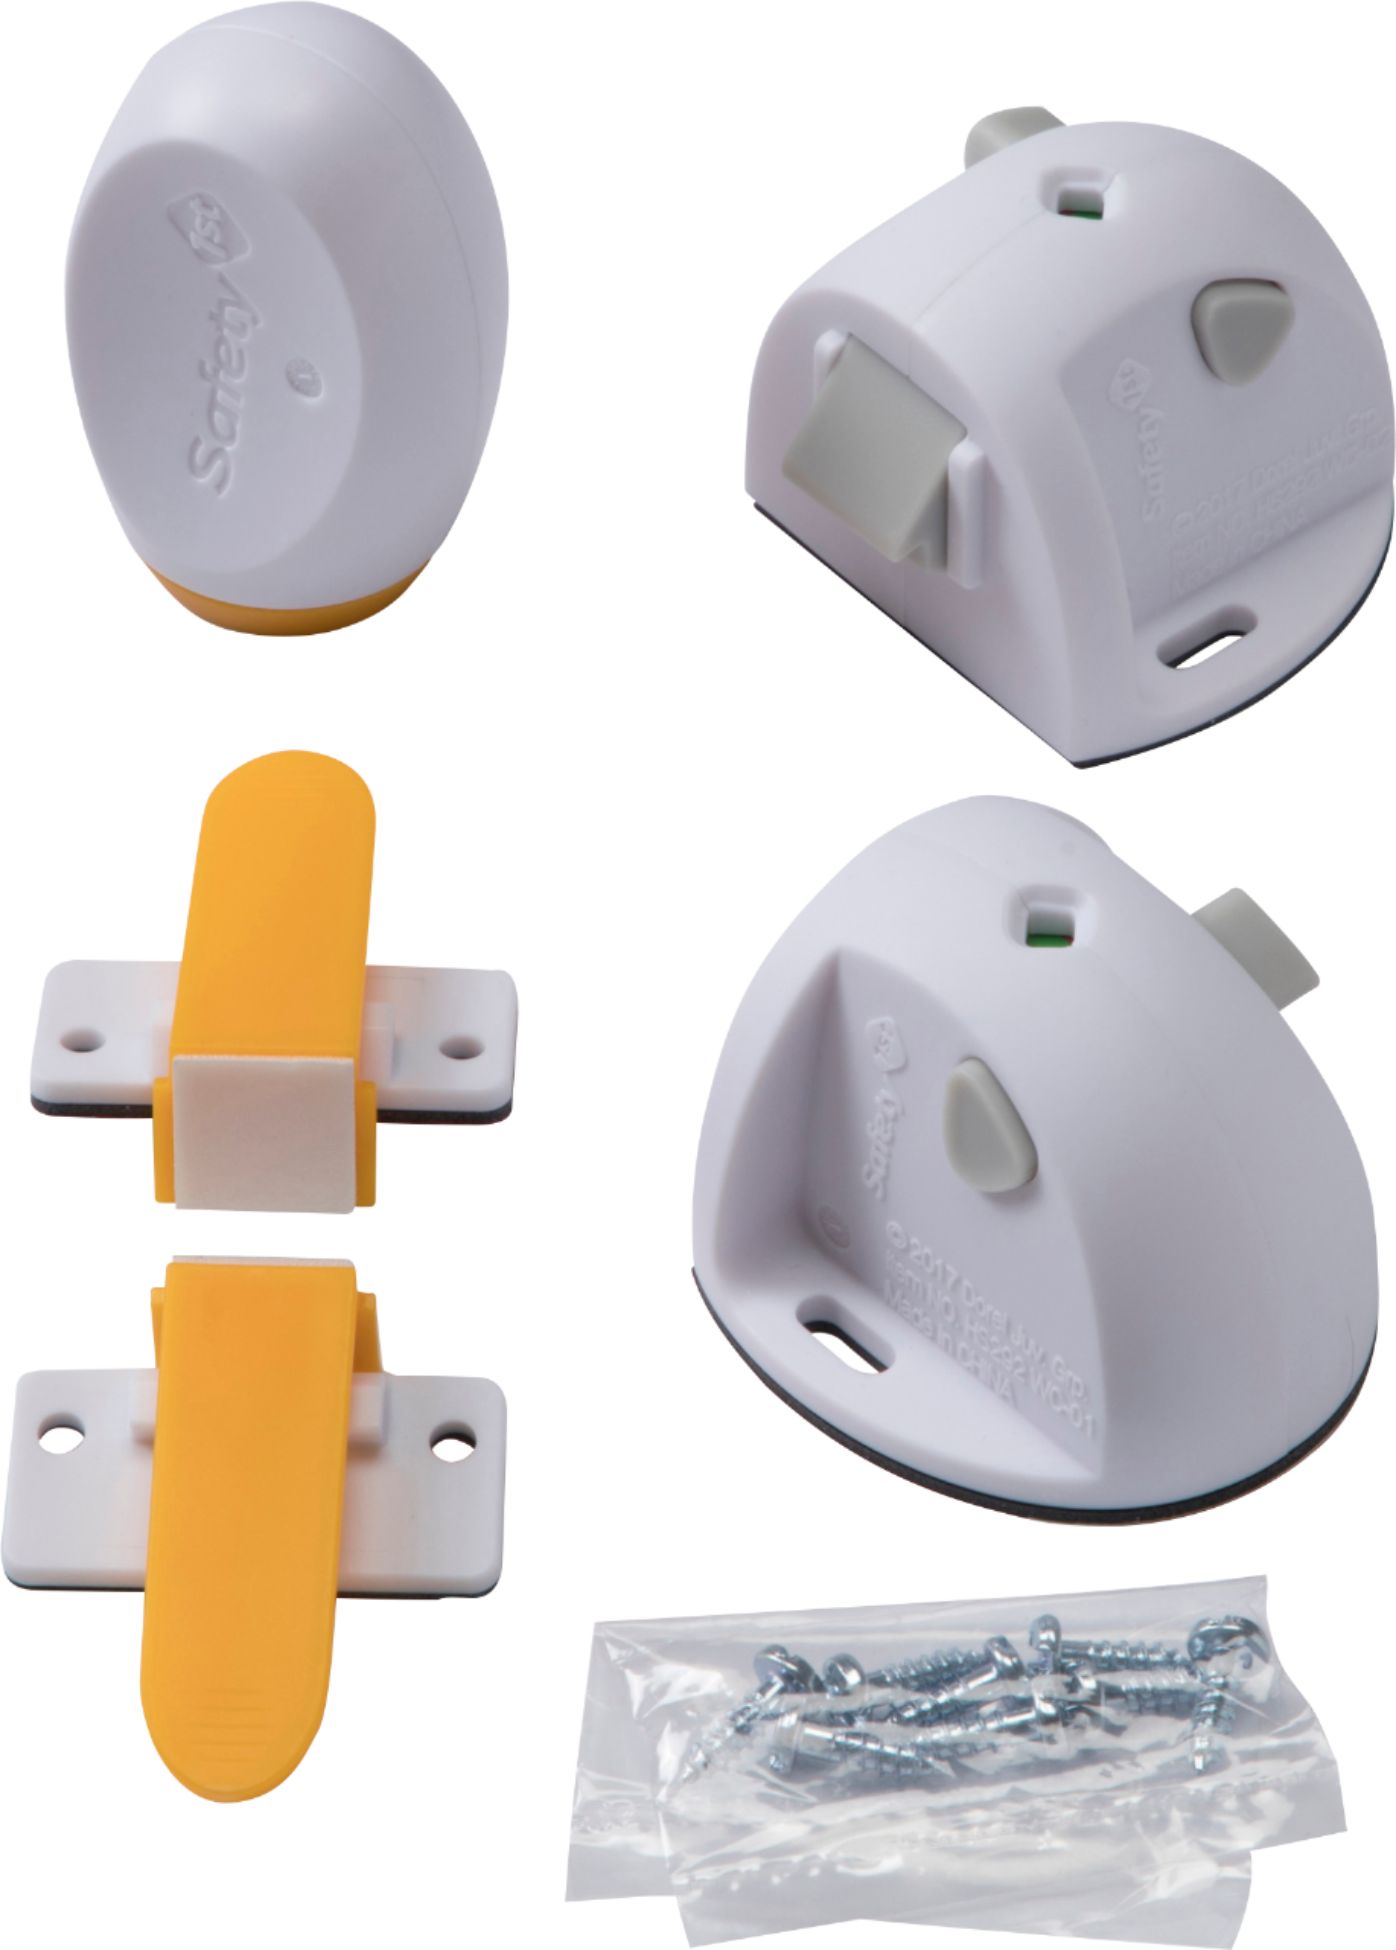 Safety 1st - Adhesive Magnetic Lock System - 2 Locks and 1 Key - White